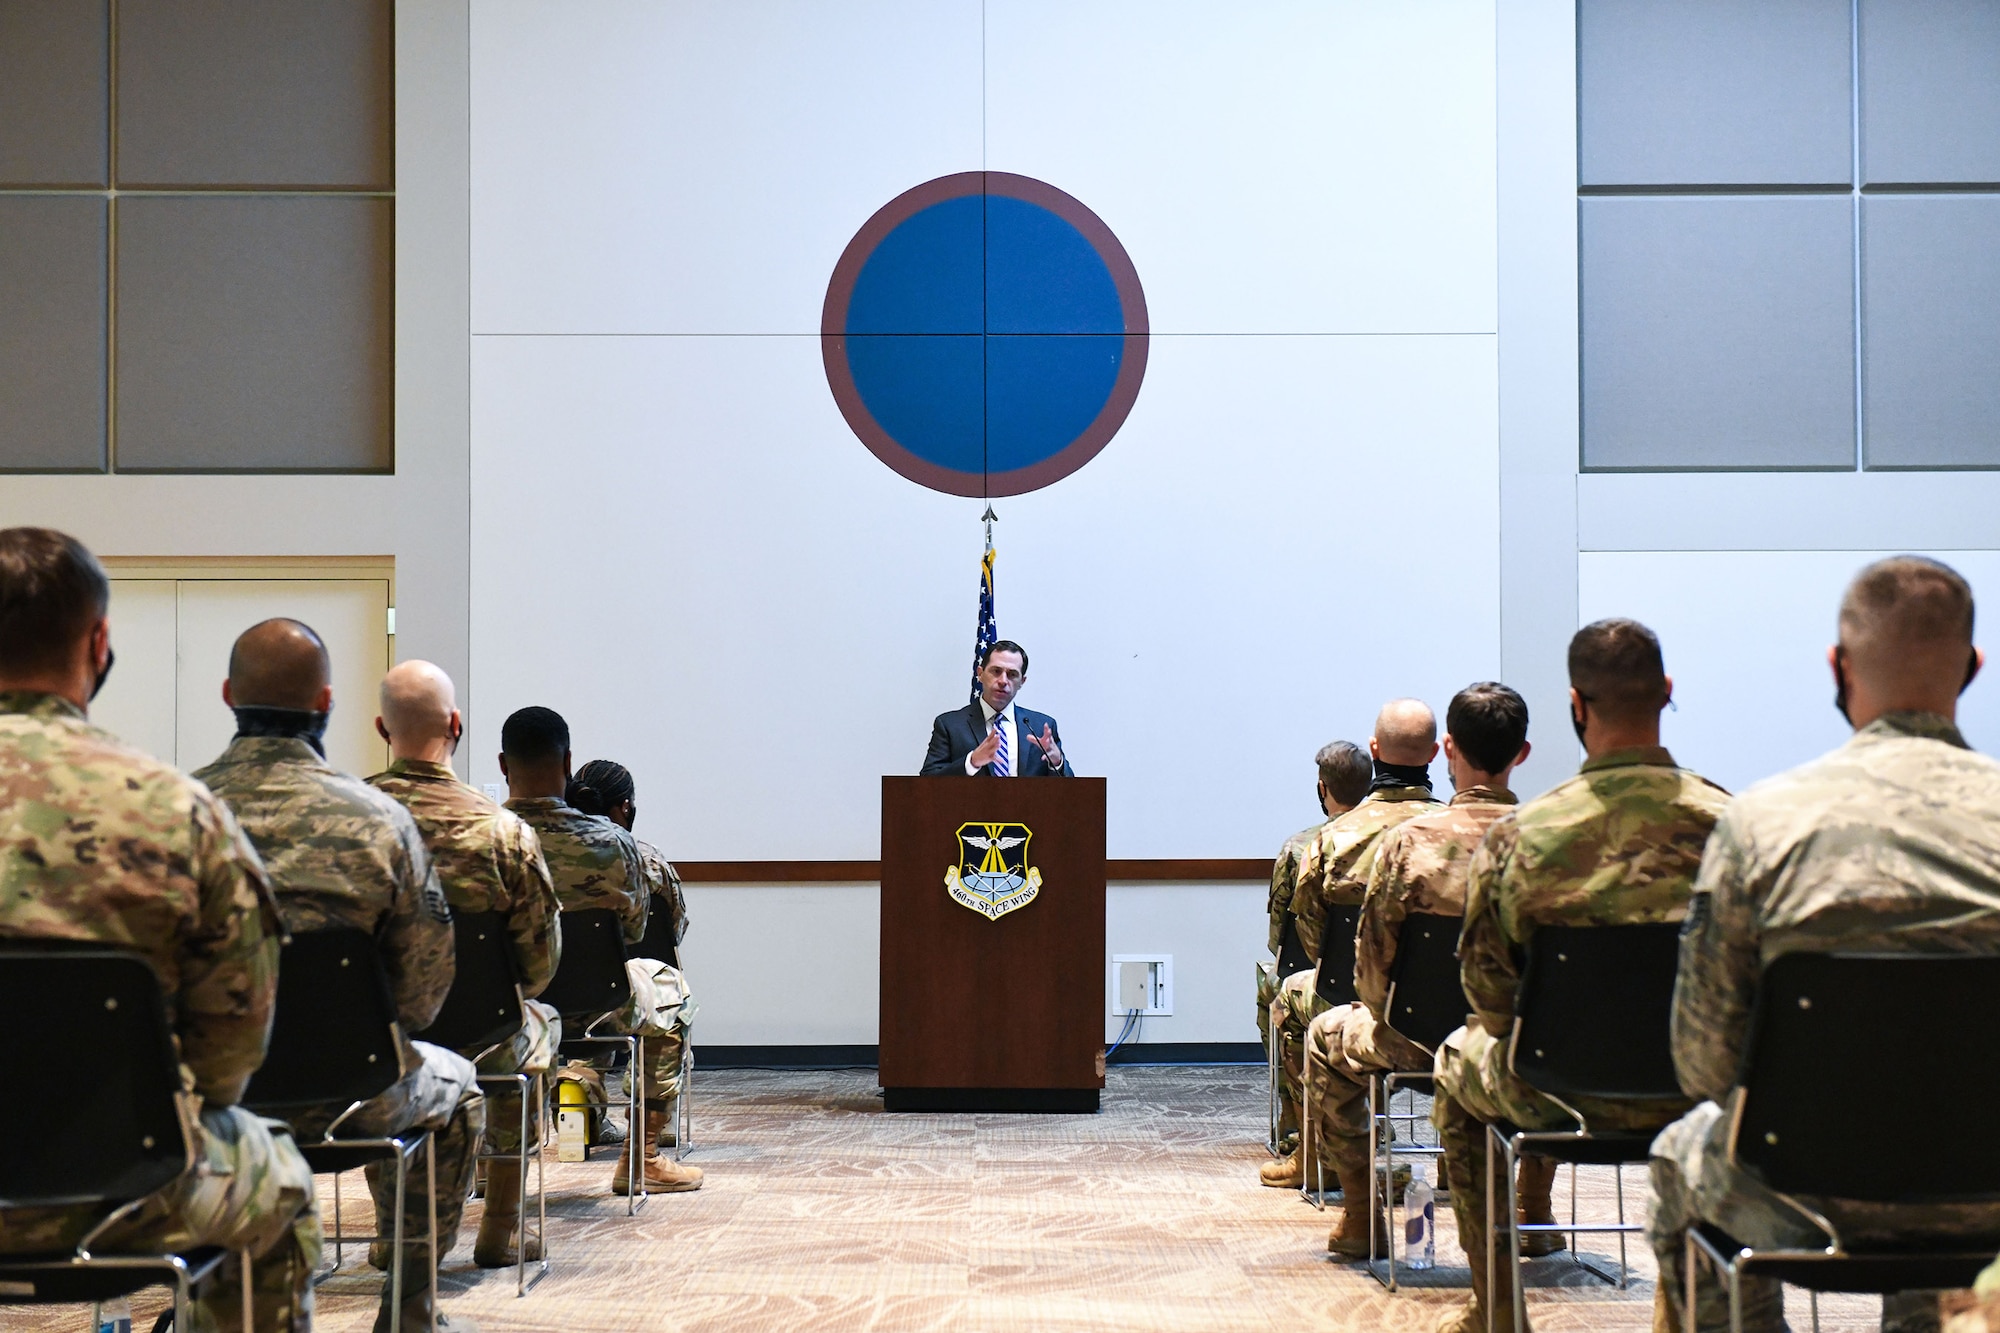 U.S. Rep. Jason Crow, Colorado’s 6th congressional district congressman, speaks to Airmen before they take their oath to transfer into the United States Space Force Sept. 10, 2020, at the Leadership Development Center on Buckley Air Force Base, Colo.